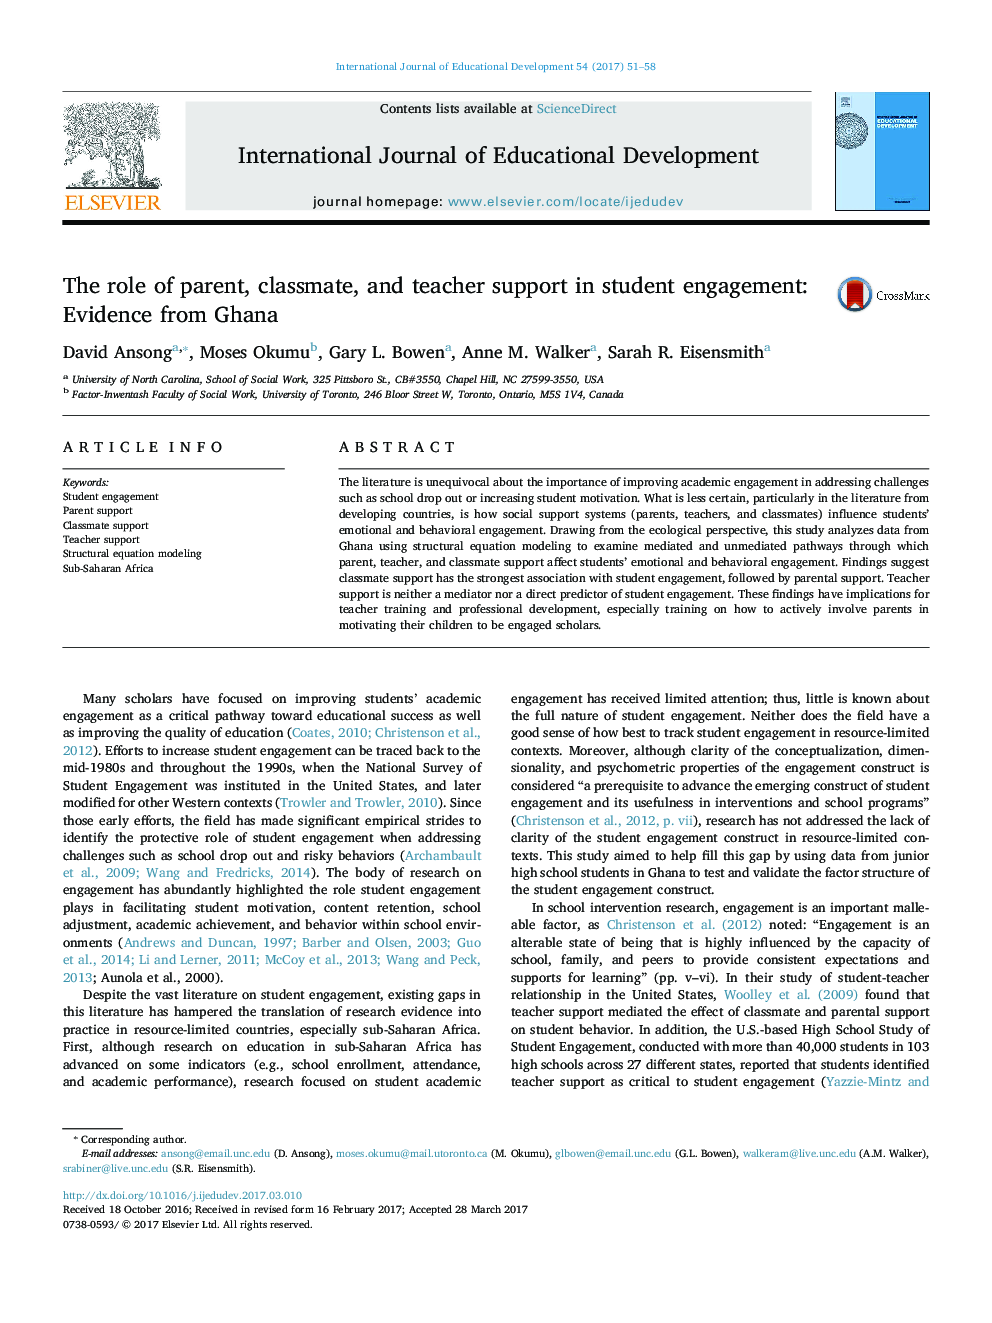 The role of parent, classmate, and teacher support in student engagement: Evidence from Ghana